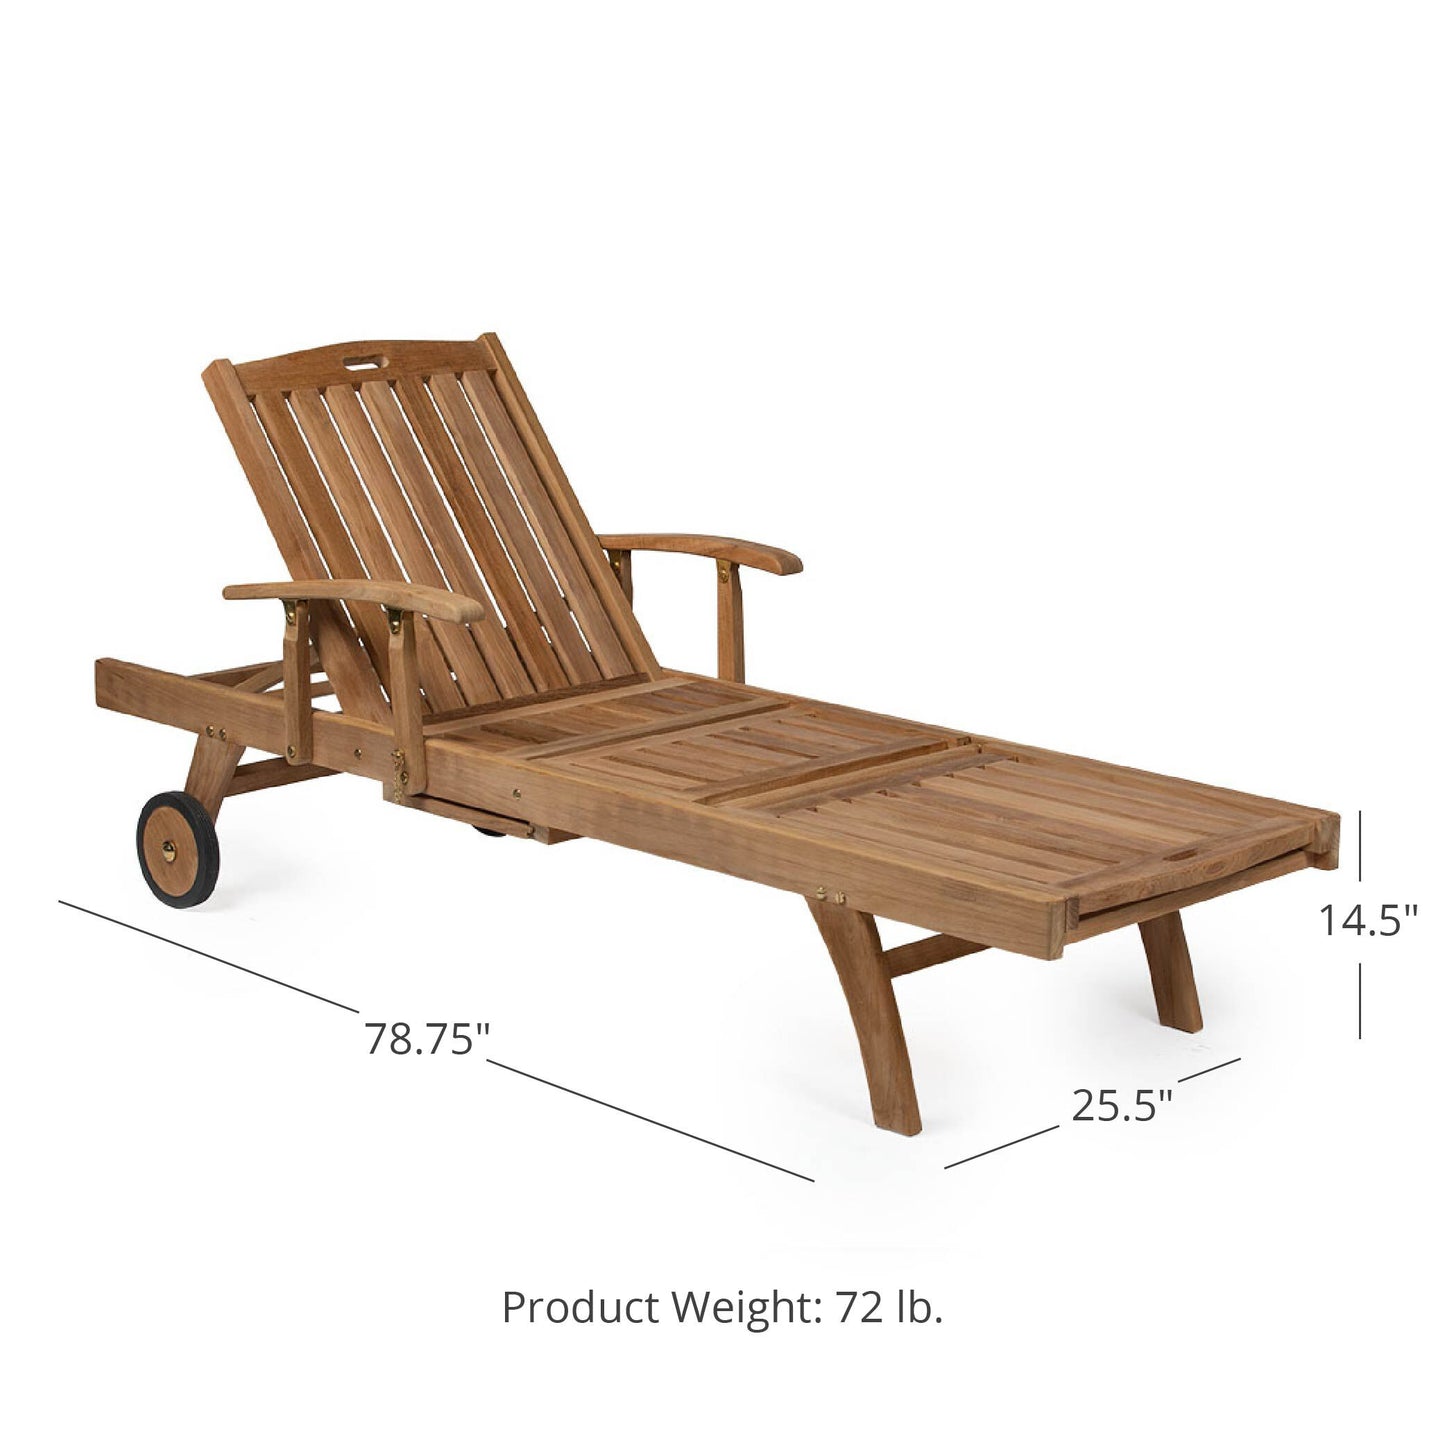 Hawthorne Grade A Teak Reclining Lounger with Optional Armrests - Optional Armrests: With Armrests | With Armrests - view 9